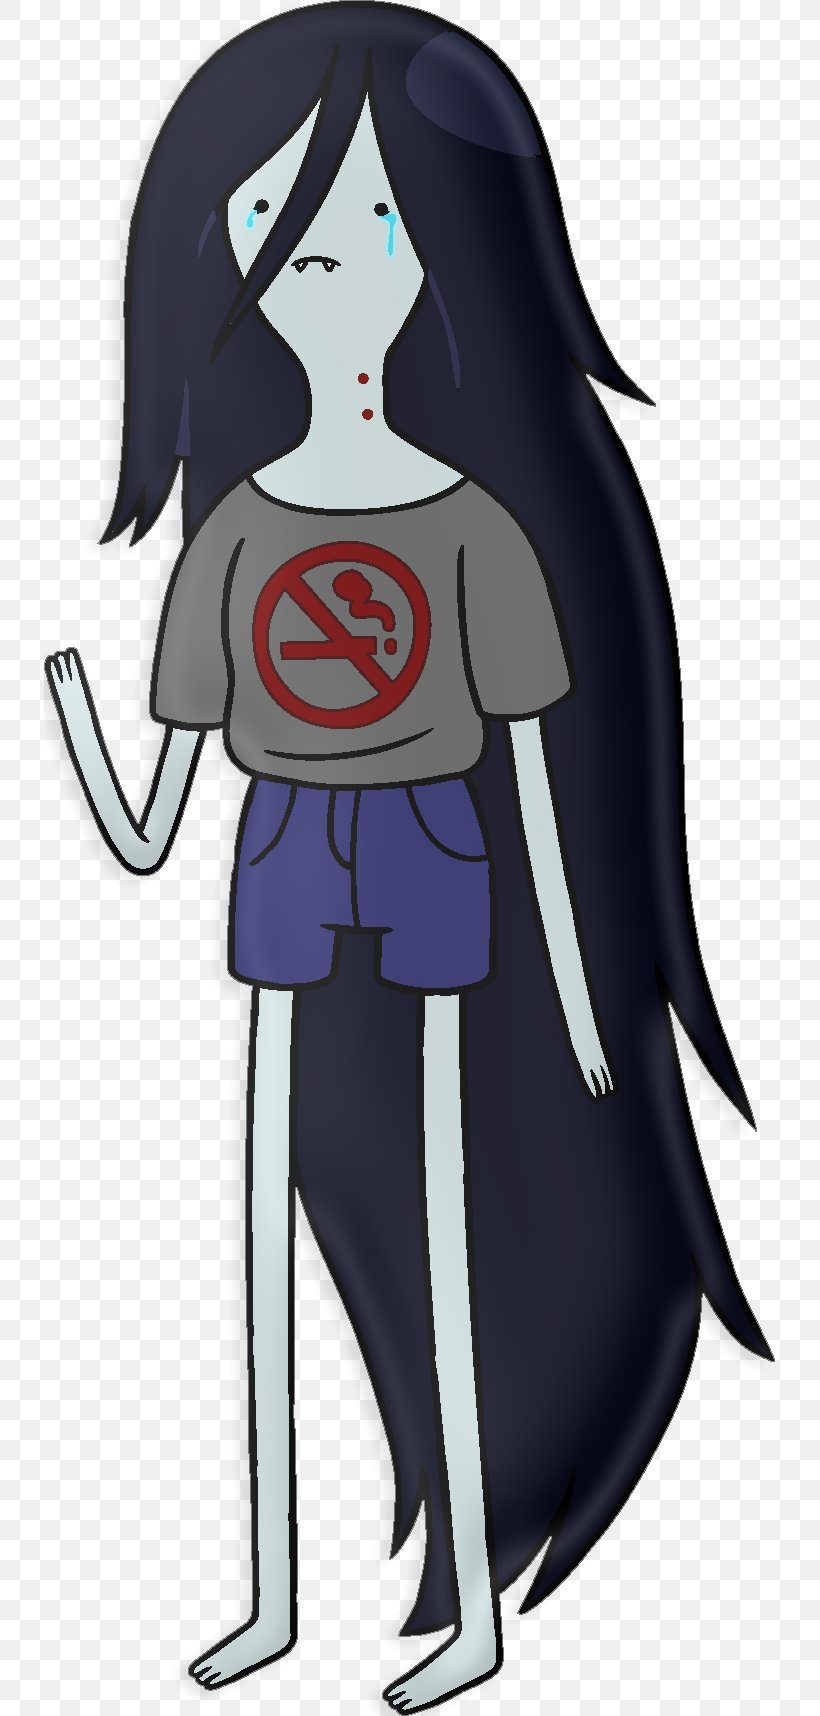 Marceline The Vampire Queen Ice King Finn The Human Princess Bubblegum Jake The Dog, PNG, 731x1716px, Marceline The Vampire Queen, Adventure, Adventure Time, Costume, Costume Design Download Free